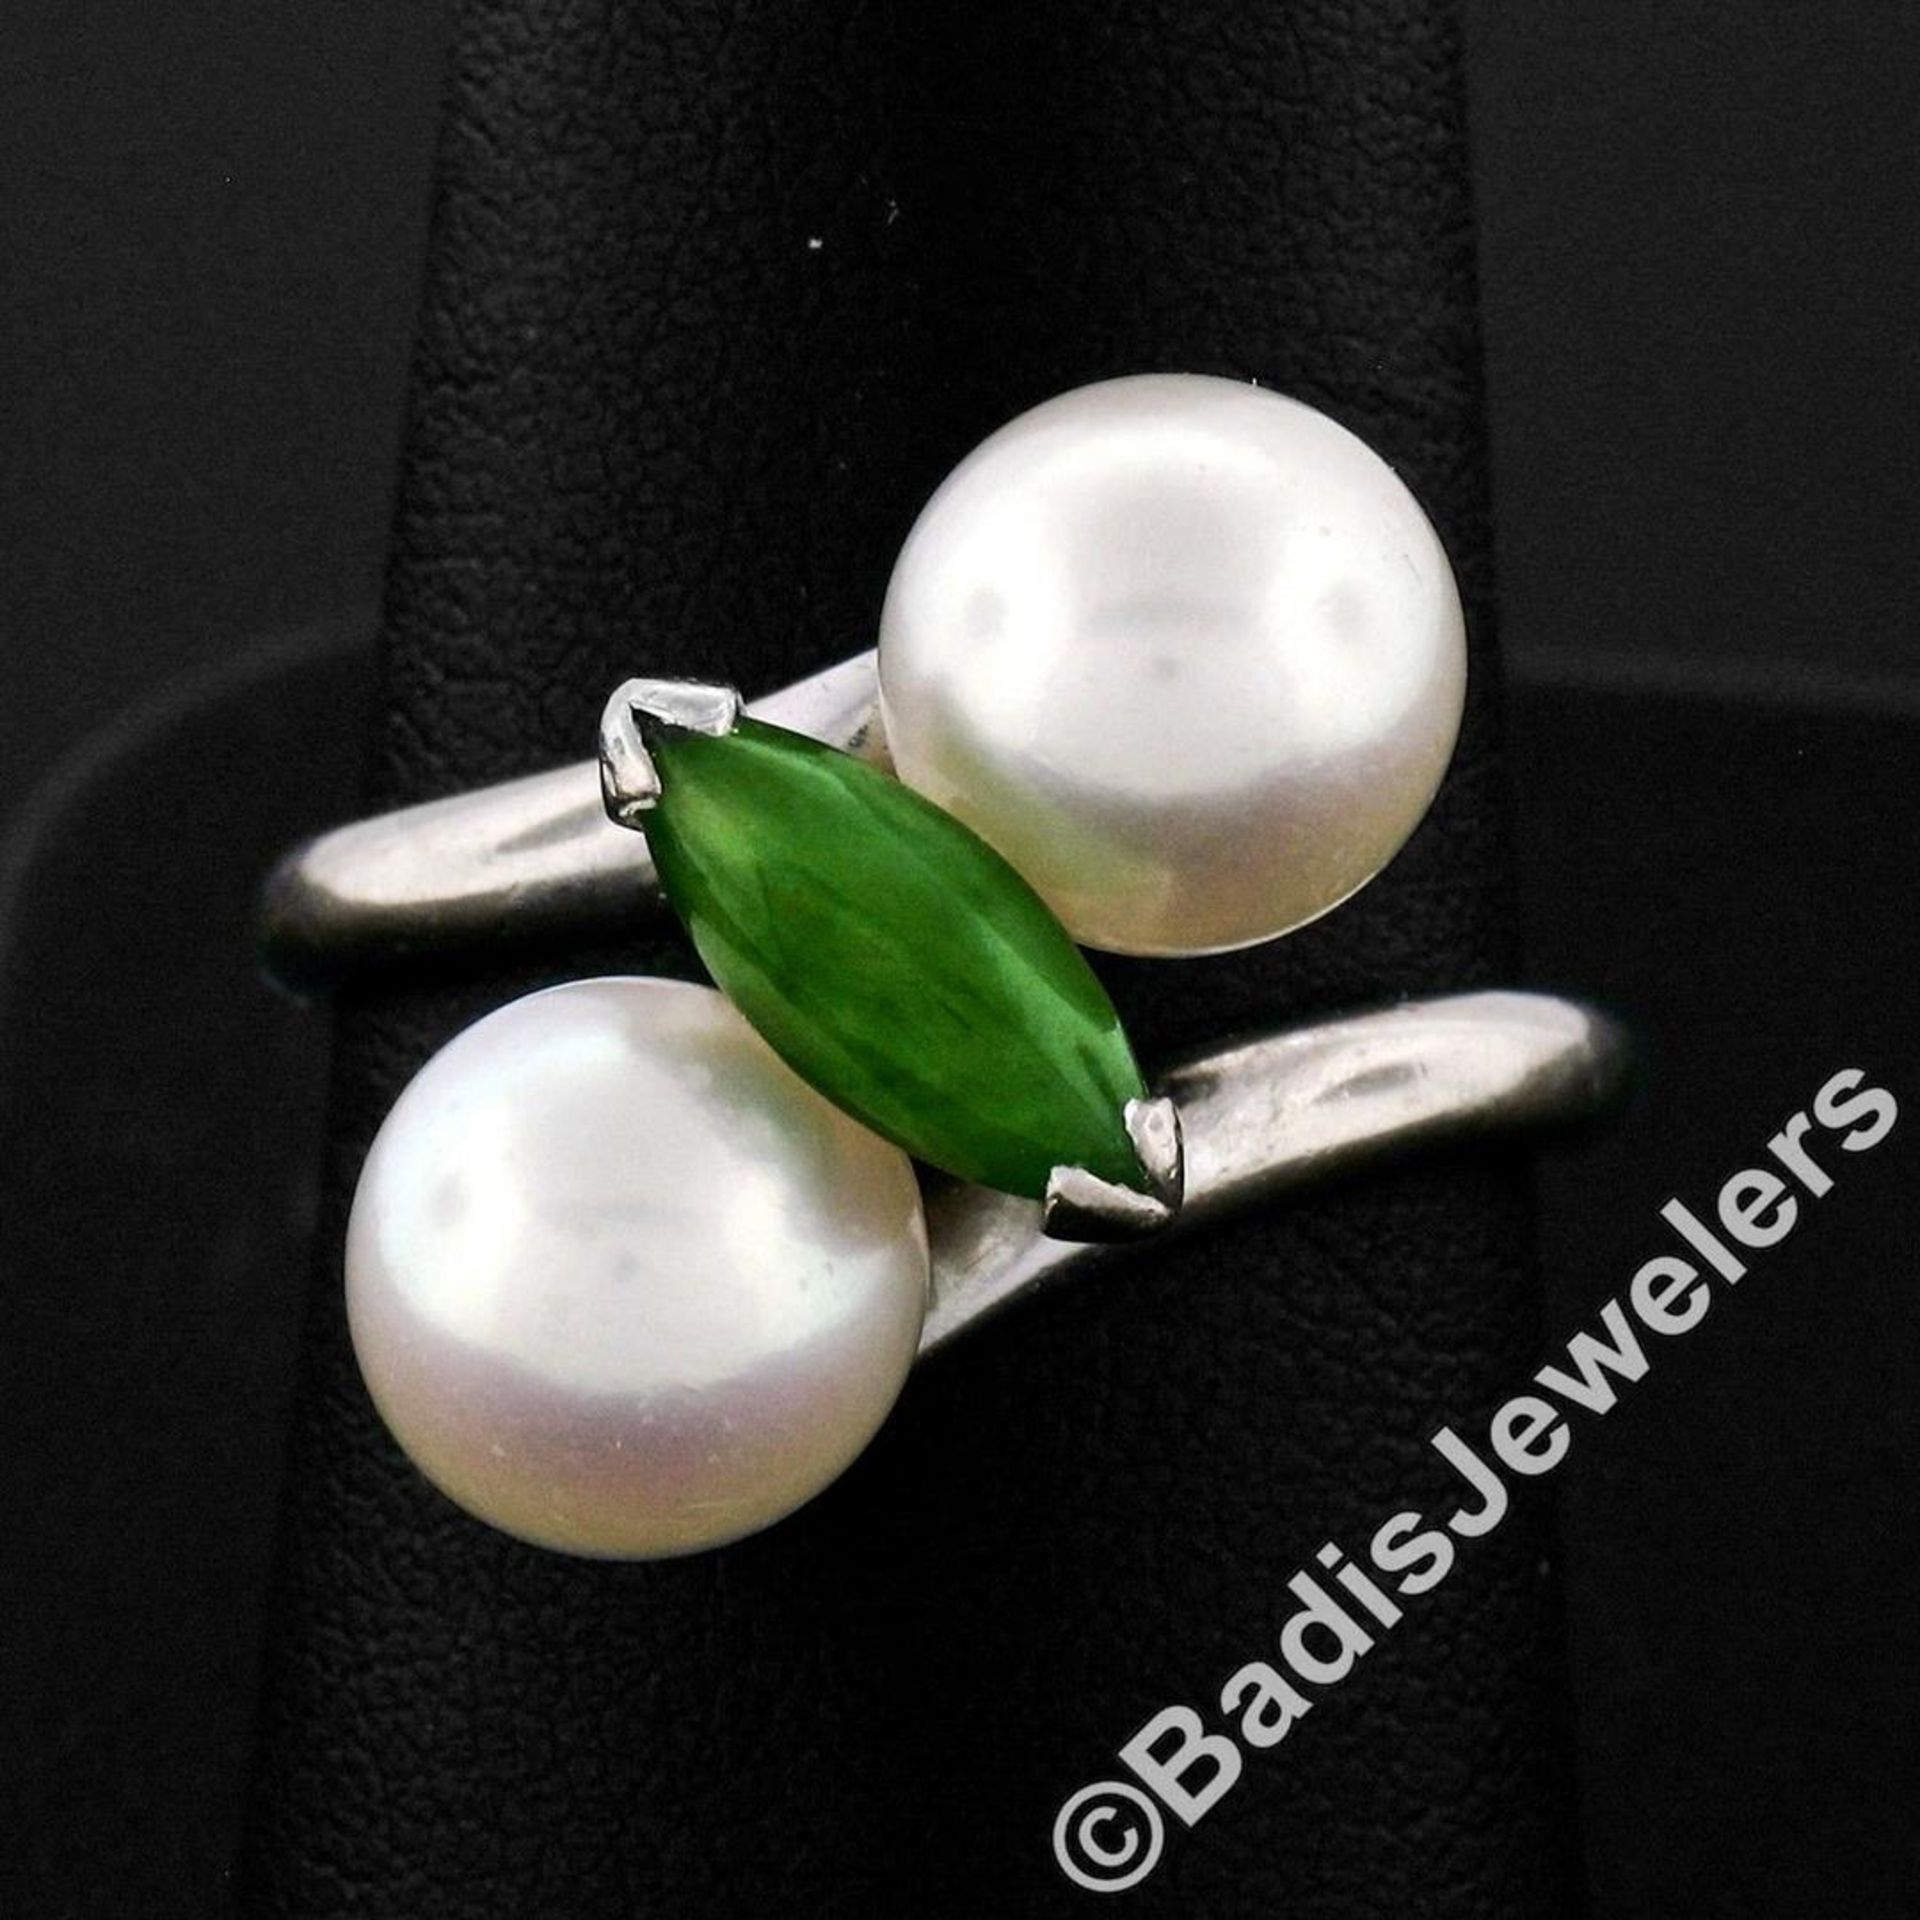 Vintage 14kt White Gold 8.35mm Round Pearl Marquise Cut Jade Bypass Ring - Image 2 of 7